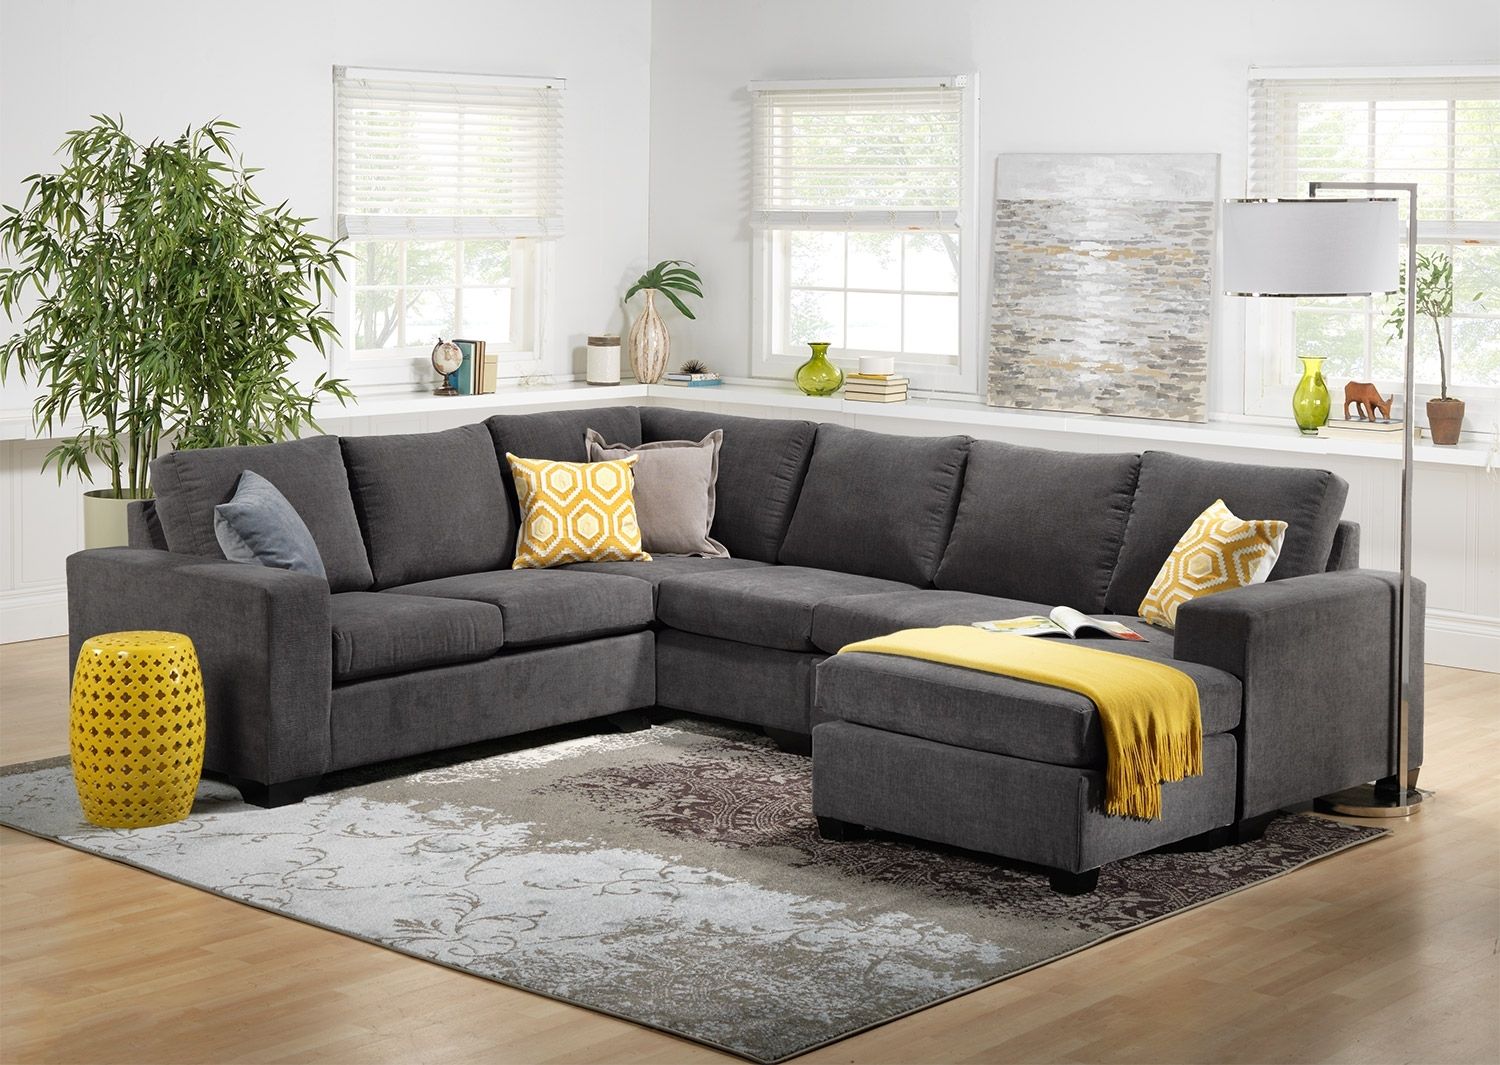 Used Sectional Sofas For Sale Edmonton Best Home Furniture Ideas With Regard To Sectional Sofas At Edmonton (View 3 of 10)